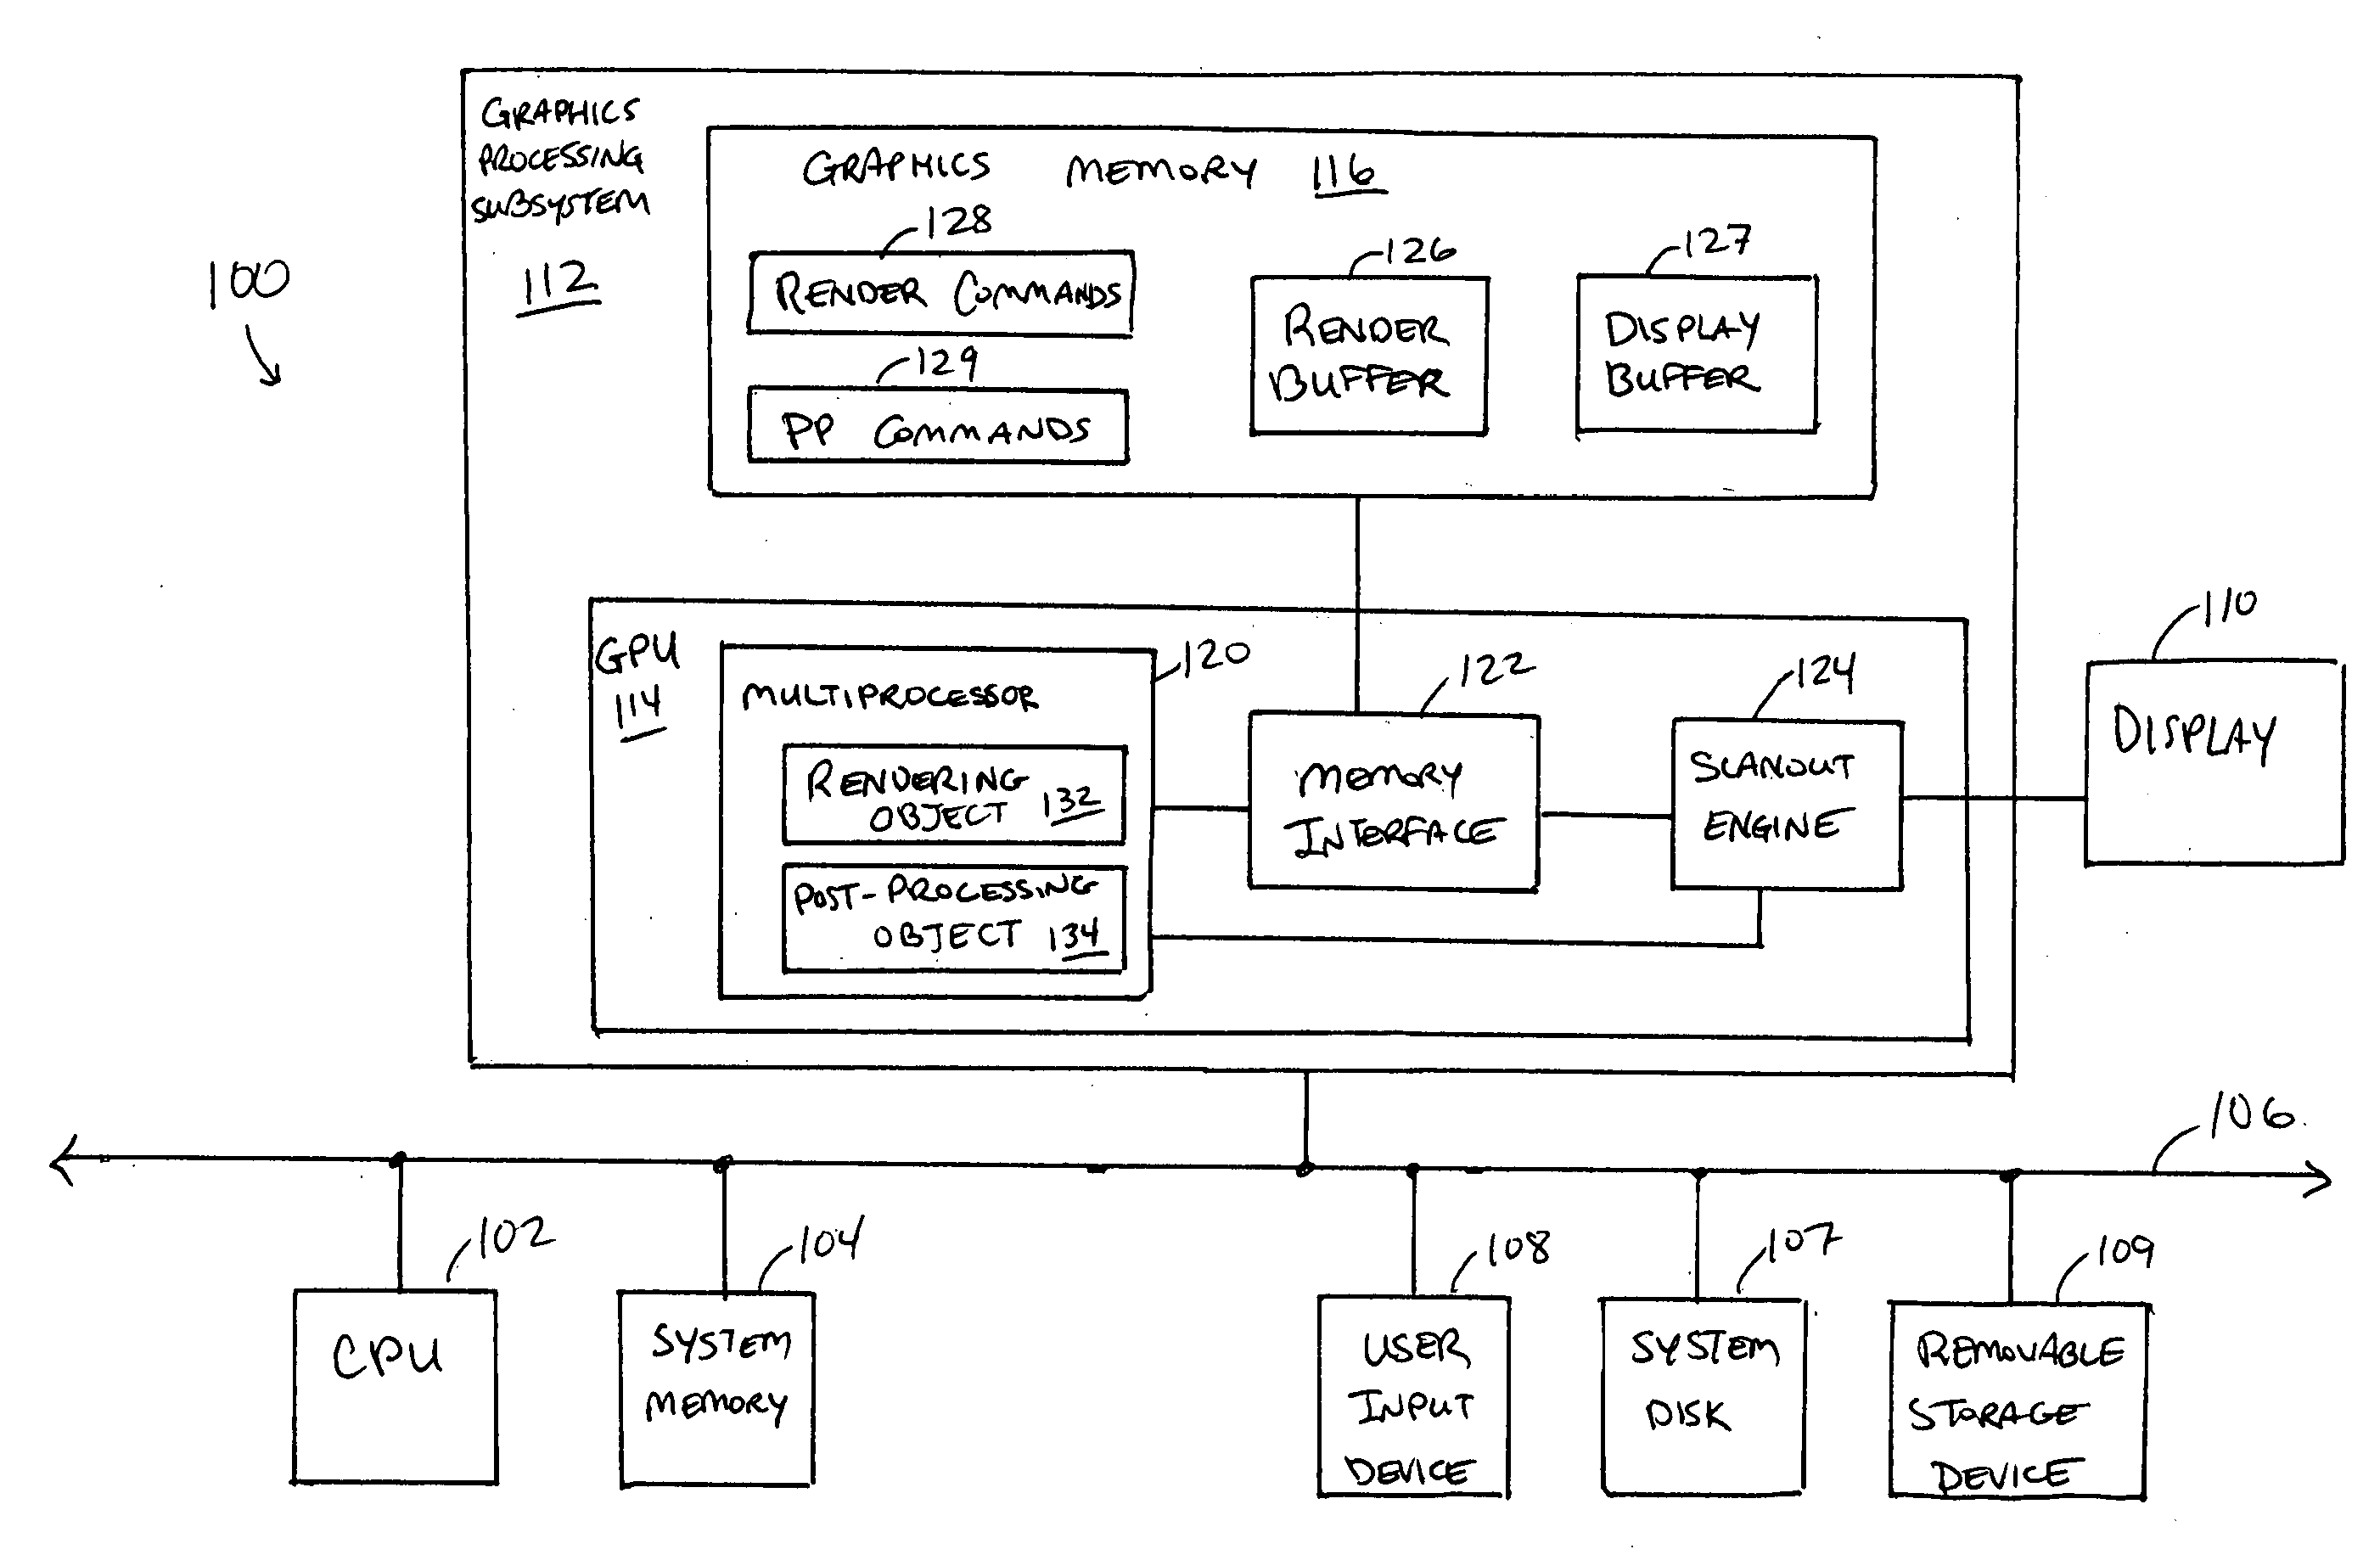 Real-time display post-processing using programmable hardware